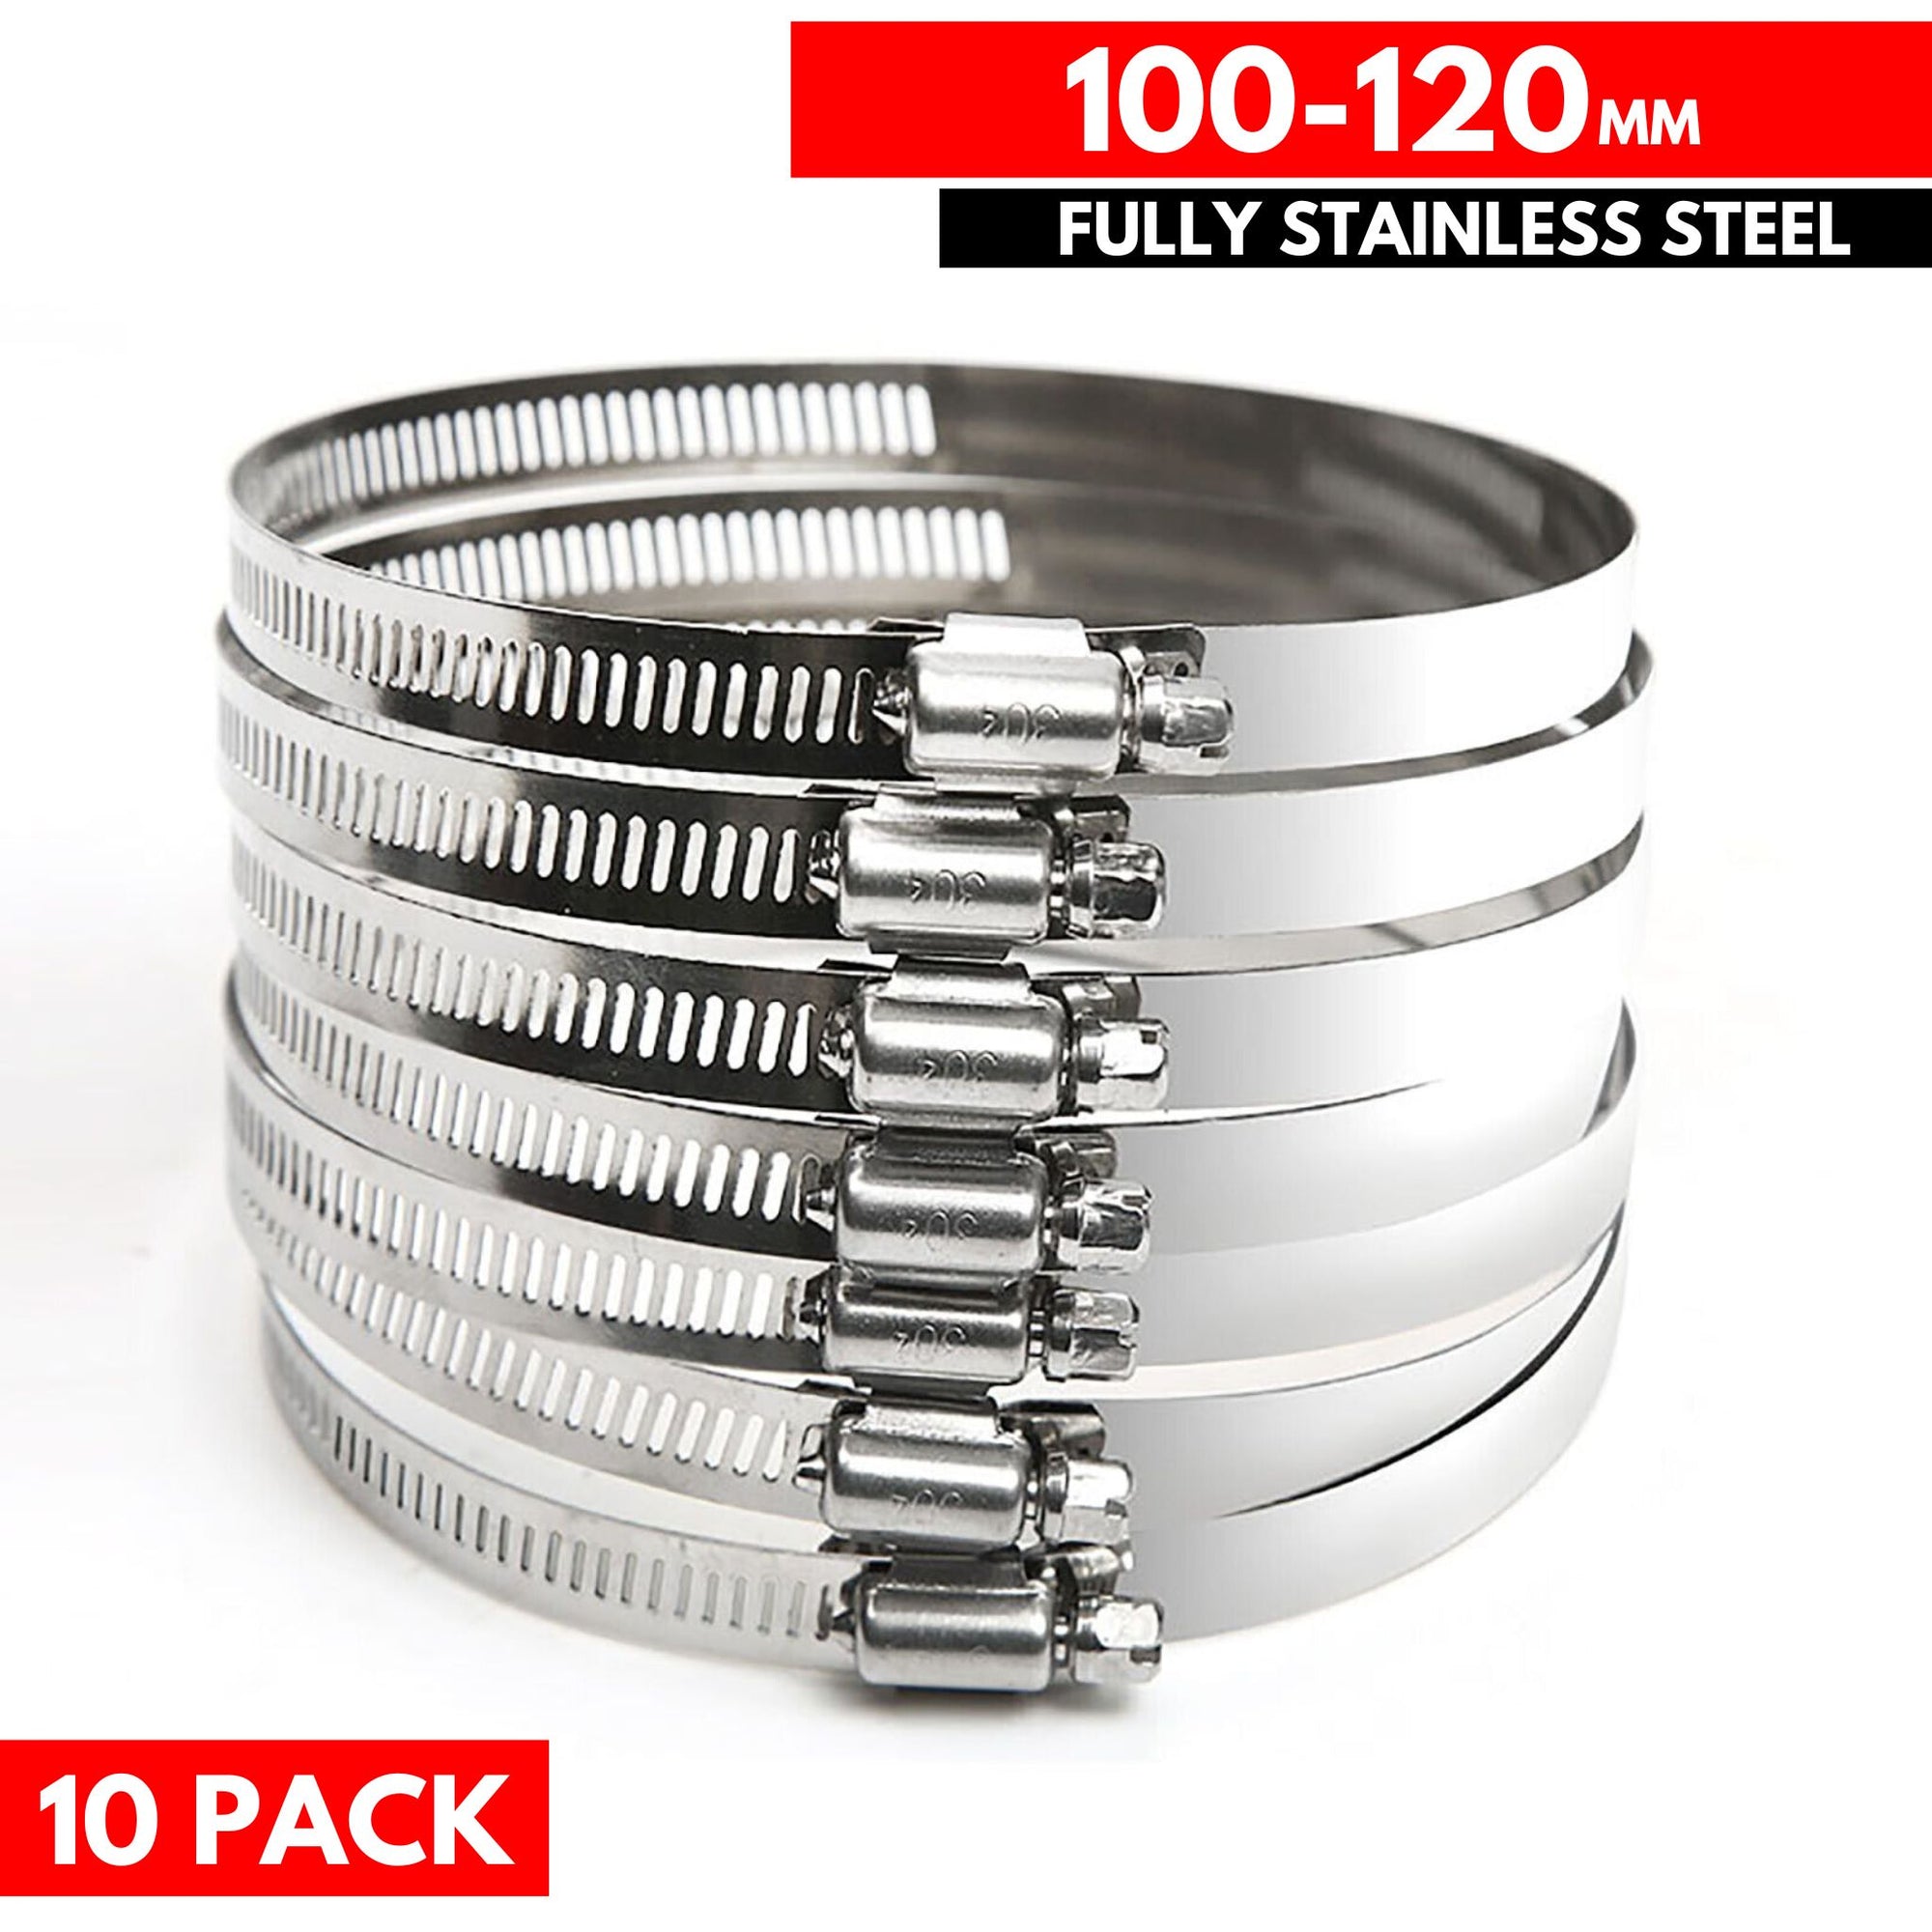 100-120MM - GERMAN TYPE 304 HOSE CLAMP - FULLY STAINLESS STEEL (10 PIECES) - South East Clearance Centre